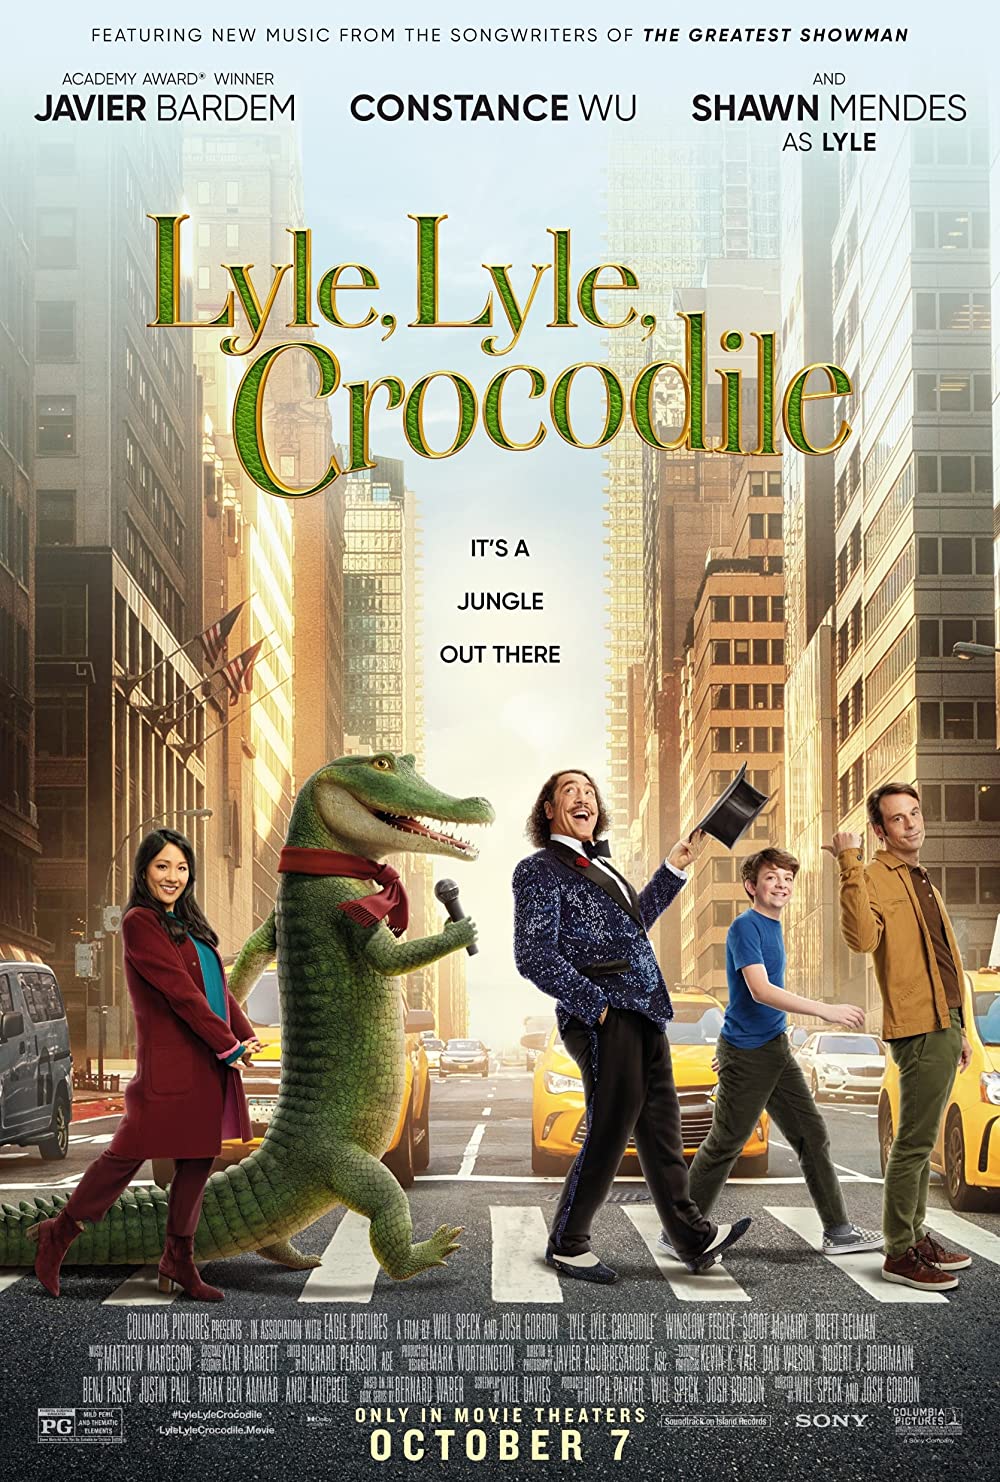 The movie poster for Lyle, Lyle, Crocodile. Lyle, the singing crocodile is walking on his hind legs on a zebra crossing in New York City with human characters from the film. Text above them says, “It’s a jungle out there.”